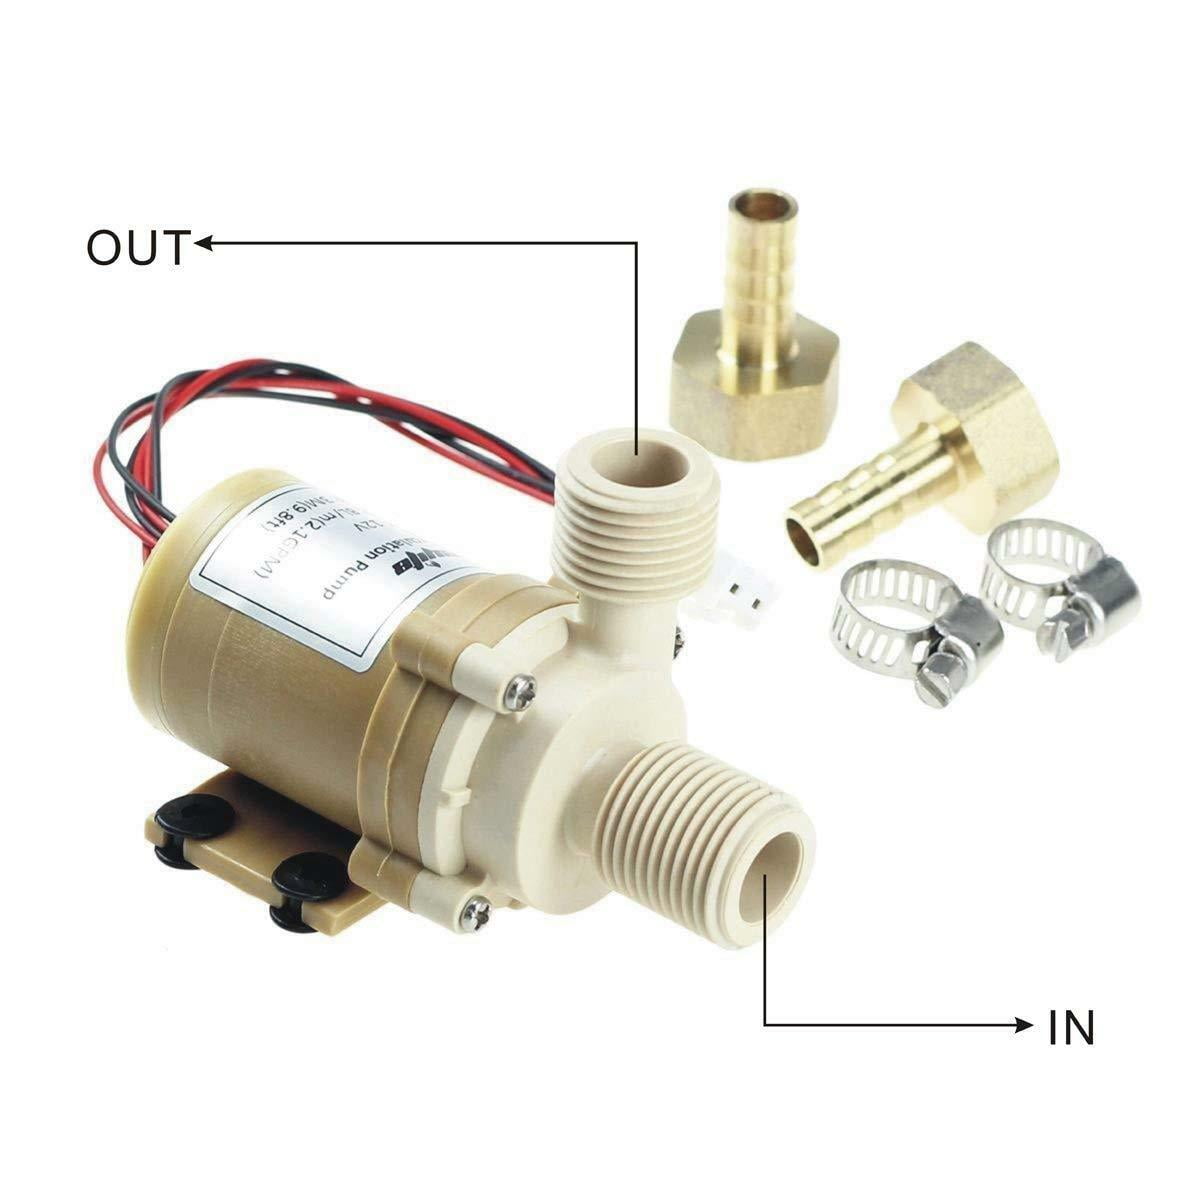 Hot Water Circulation Pump 12-Volt DC Brushless Motor Flow Rate 2.1GPM Low Noise 